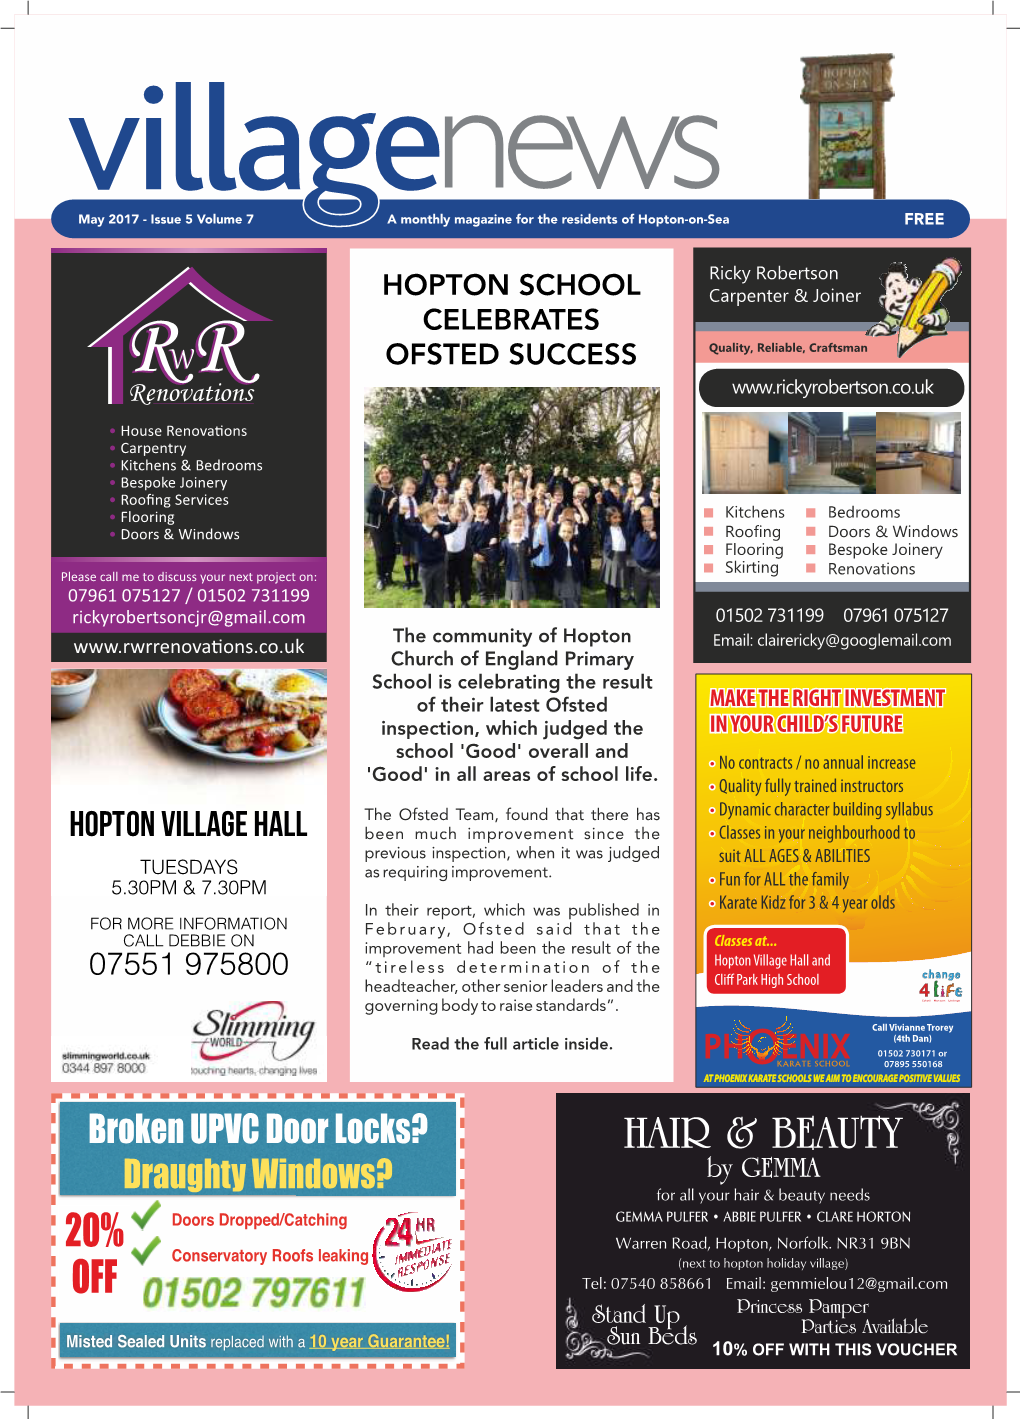 May 2017 - Issue 5 Volume 7 a Monthly Magazine for the Residents of Hopton-On-Sea FREE